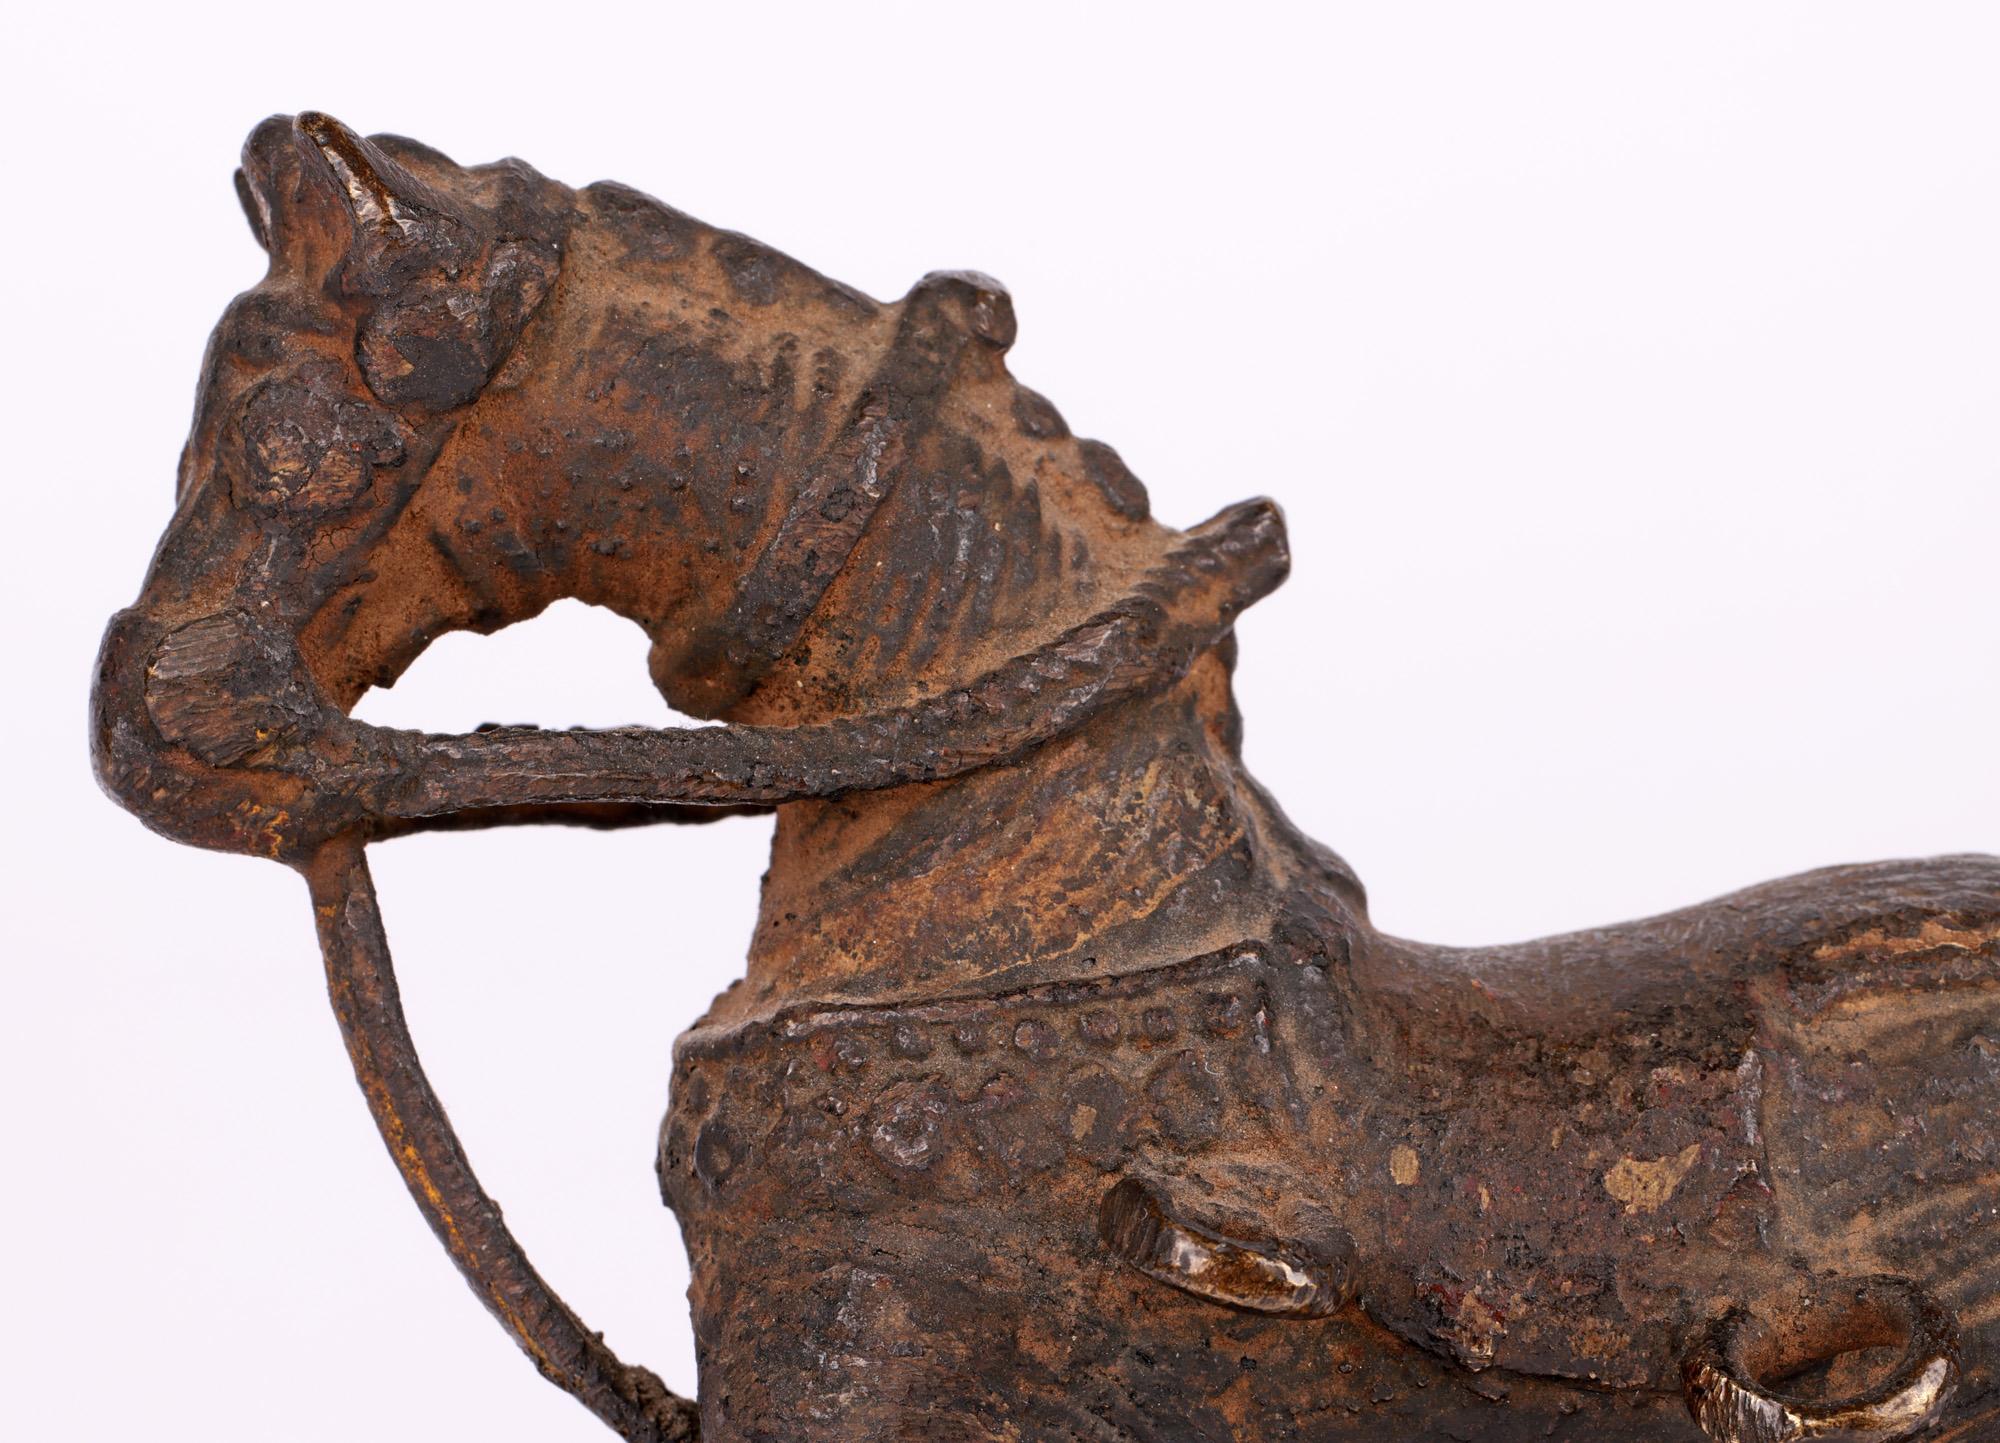 A good antique bronze temple horse on wheels toy originating from Jhansi City in Bundelkhand in Northern India and dating from the 19th century. The Hindu region of Bundelkhand is well known for its bronzes this early example is cast in bronze using